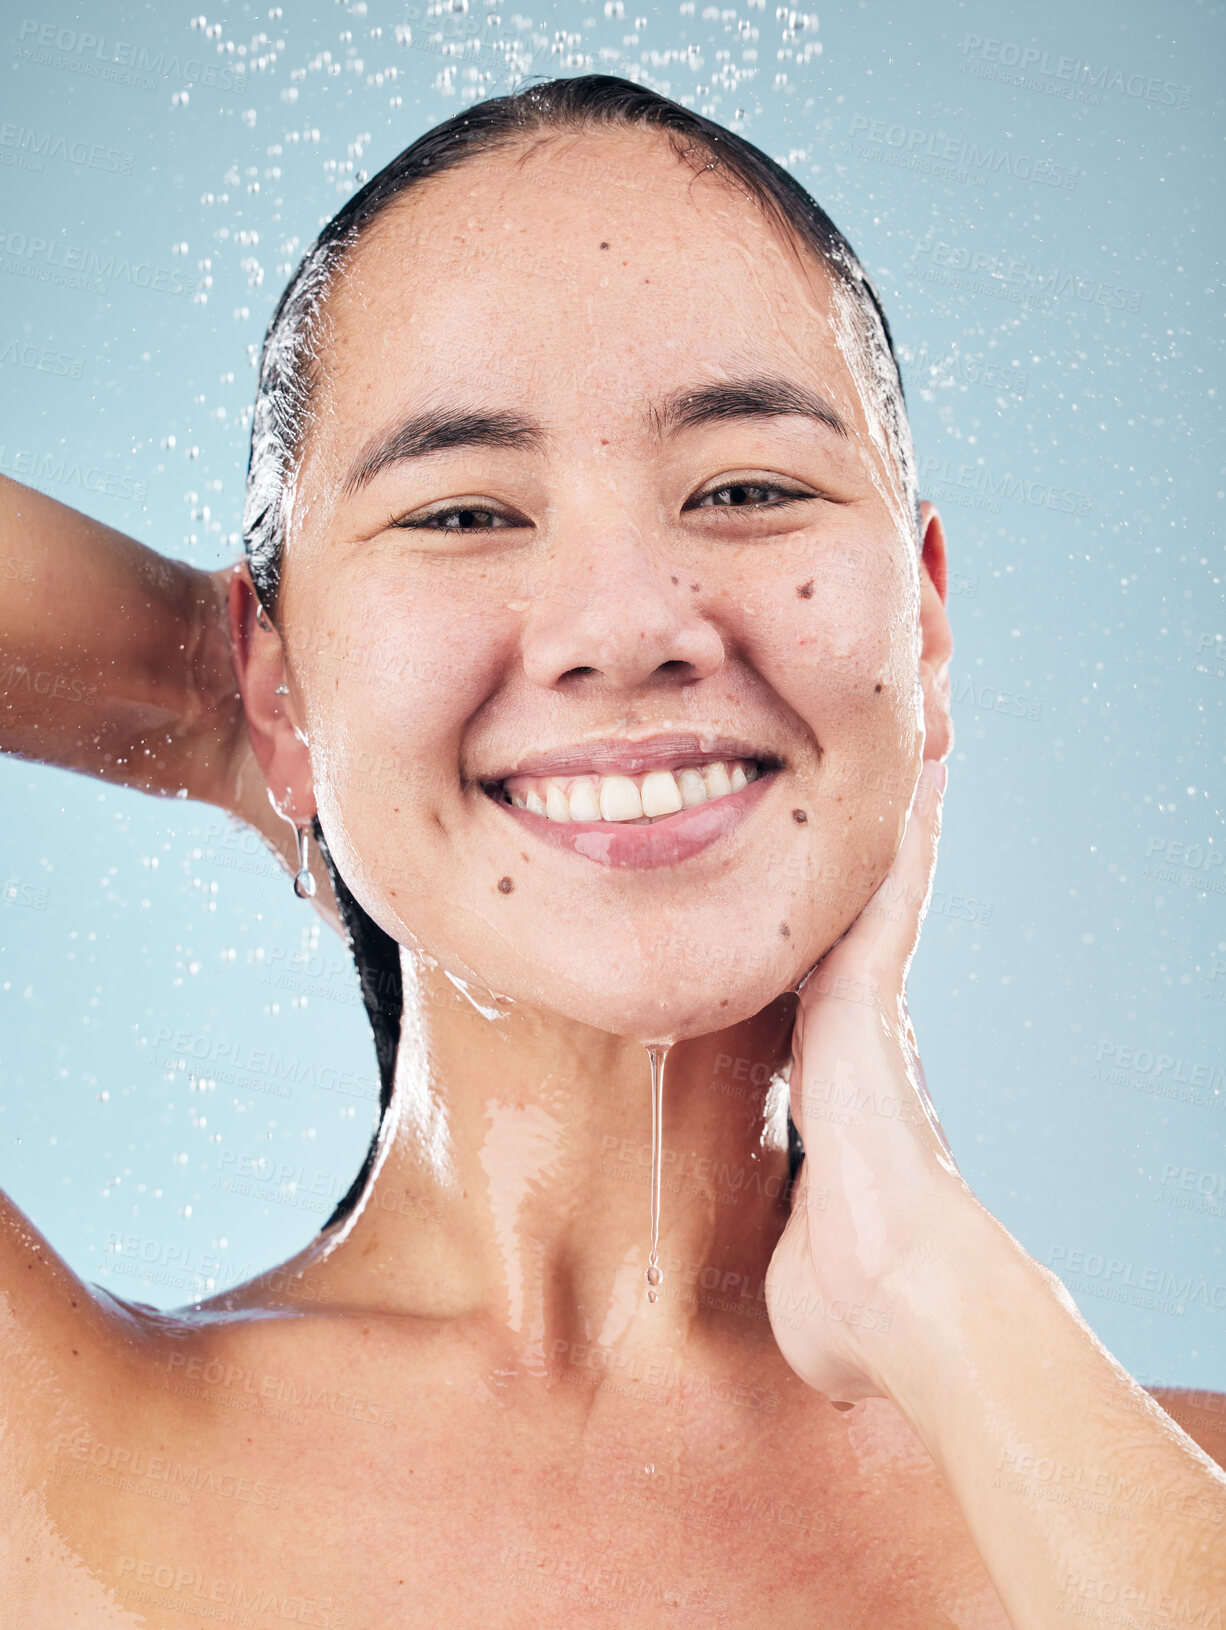 Buy stock photo Skincare, water splash and face of woman cleaning in studio isolated on a blue background. Shower, hygiene and portrait of happy Asian model washing, cosmetic and bath for wellness, health and beauty